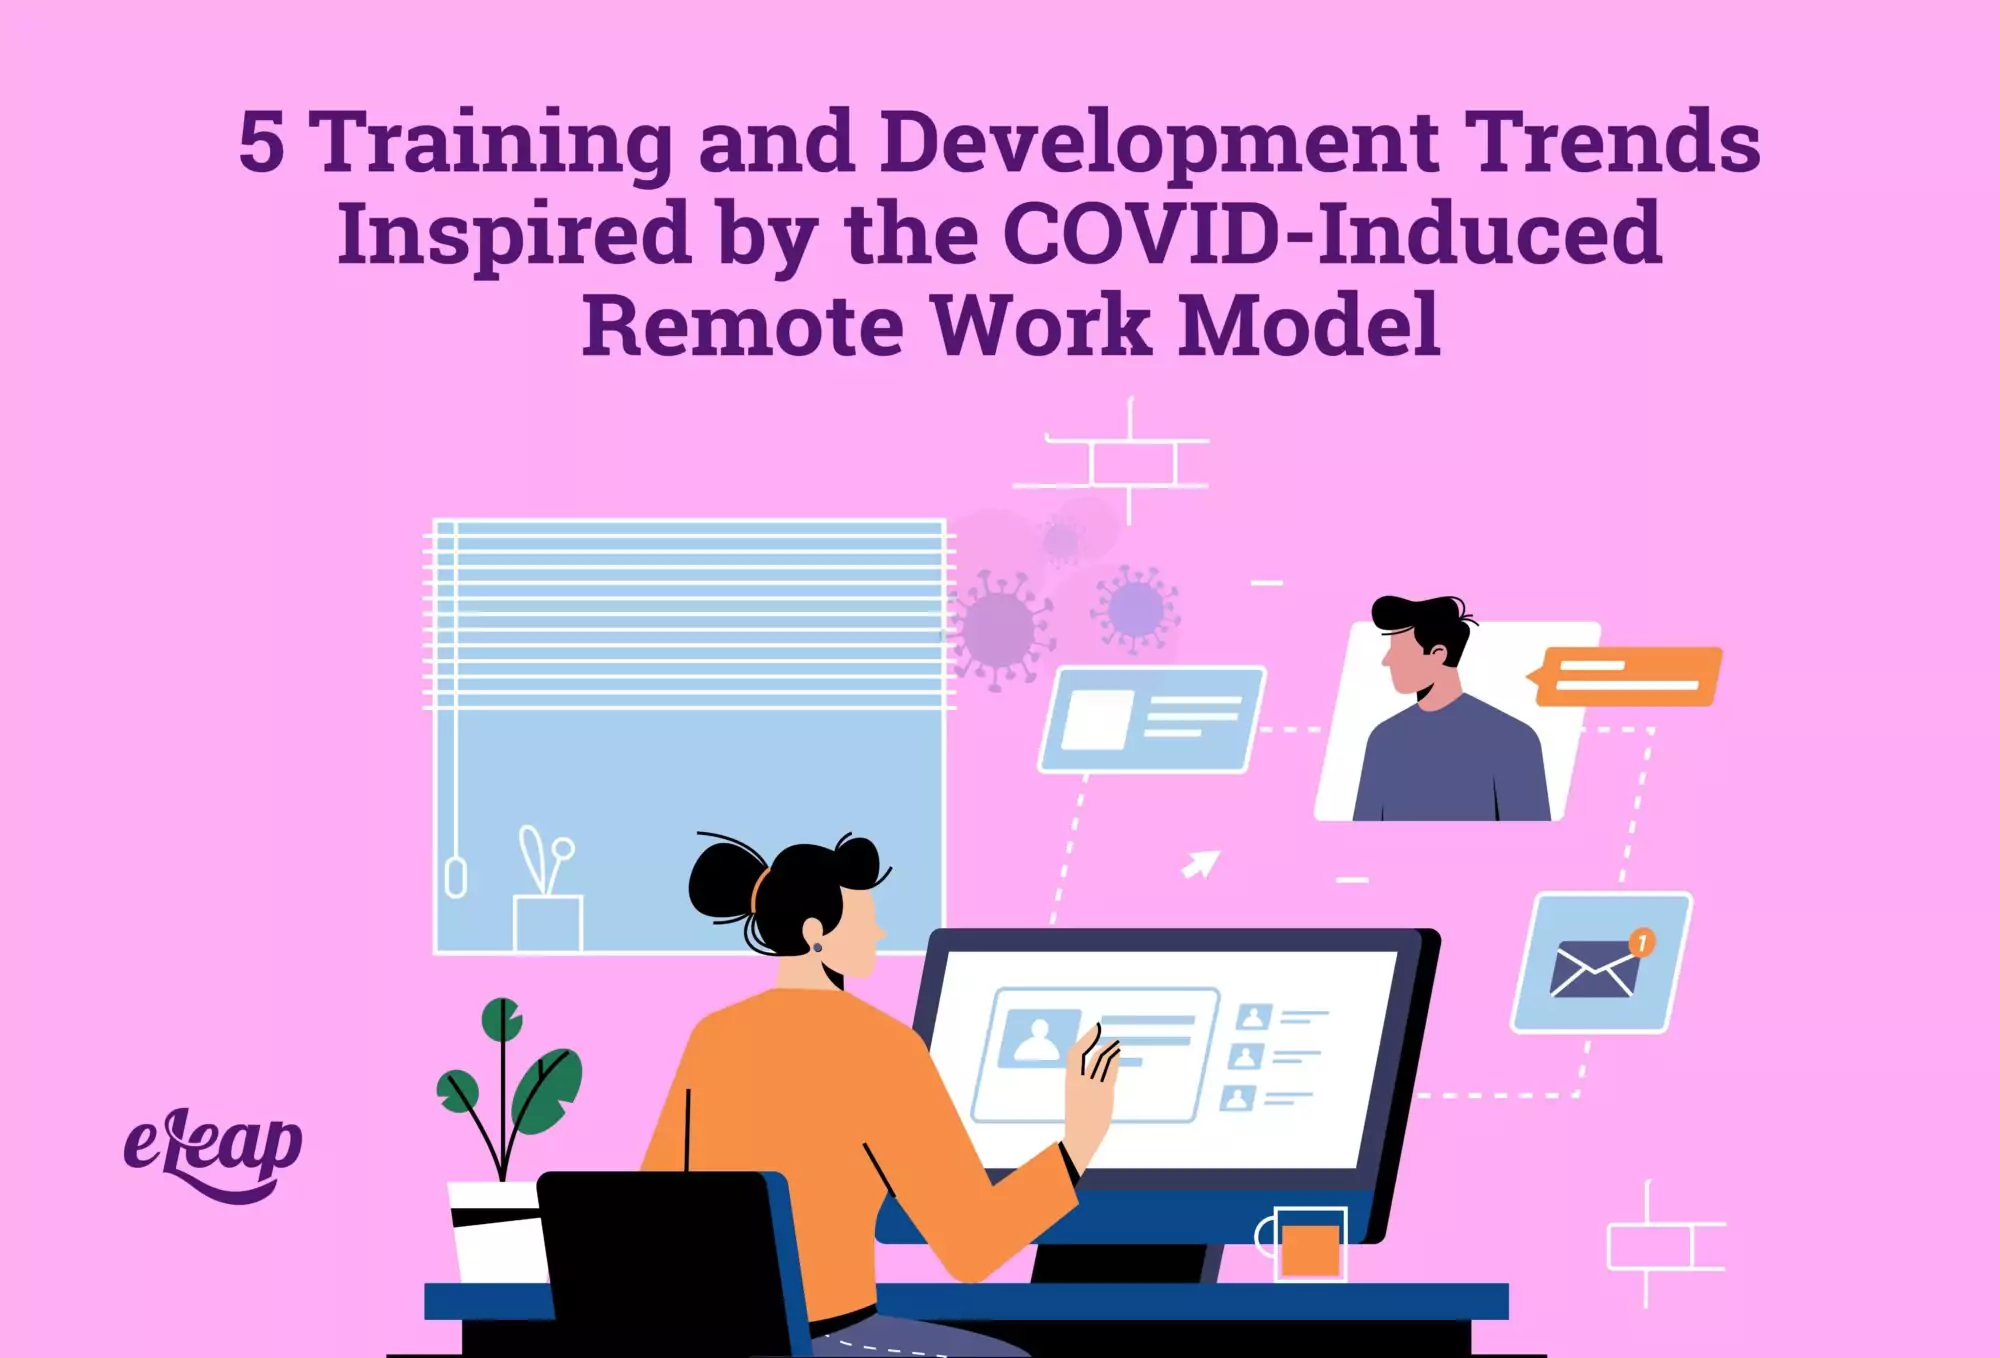 5 Training and Development Trends Inspired by the COVID-Induced Remote Work Model